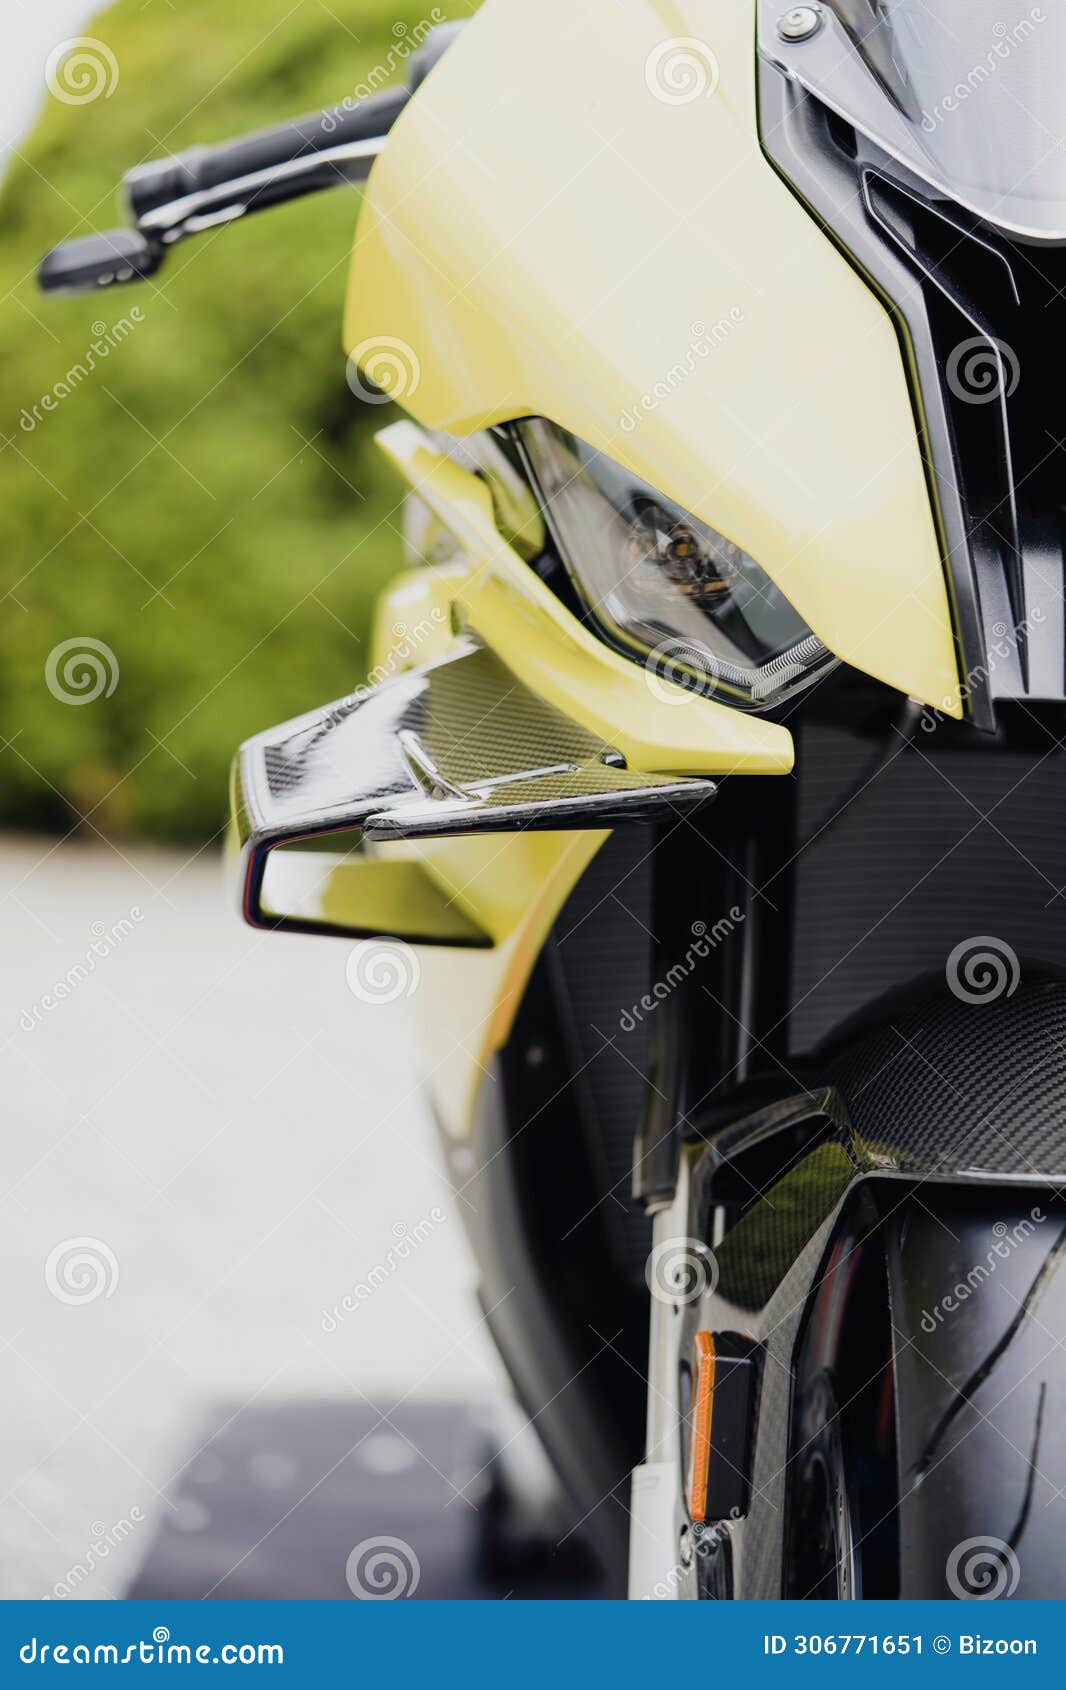 aerodynamic flaps or wings on a modern sports motorcycle